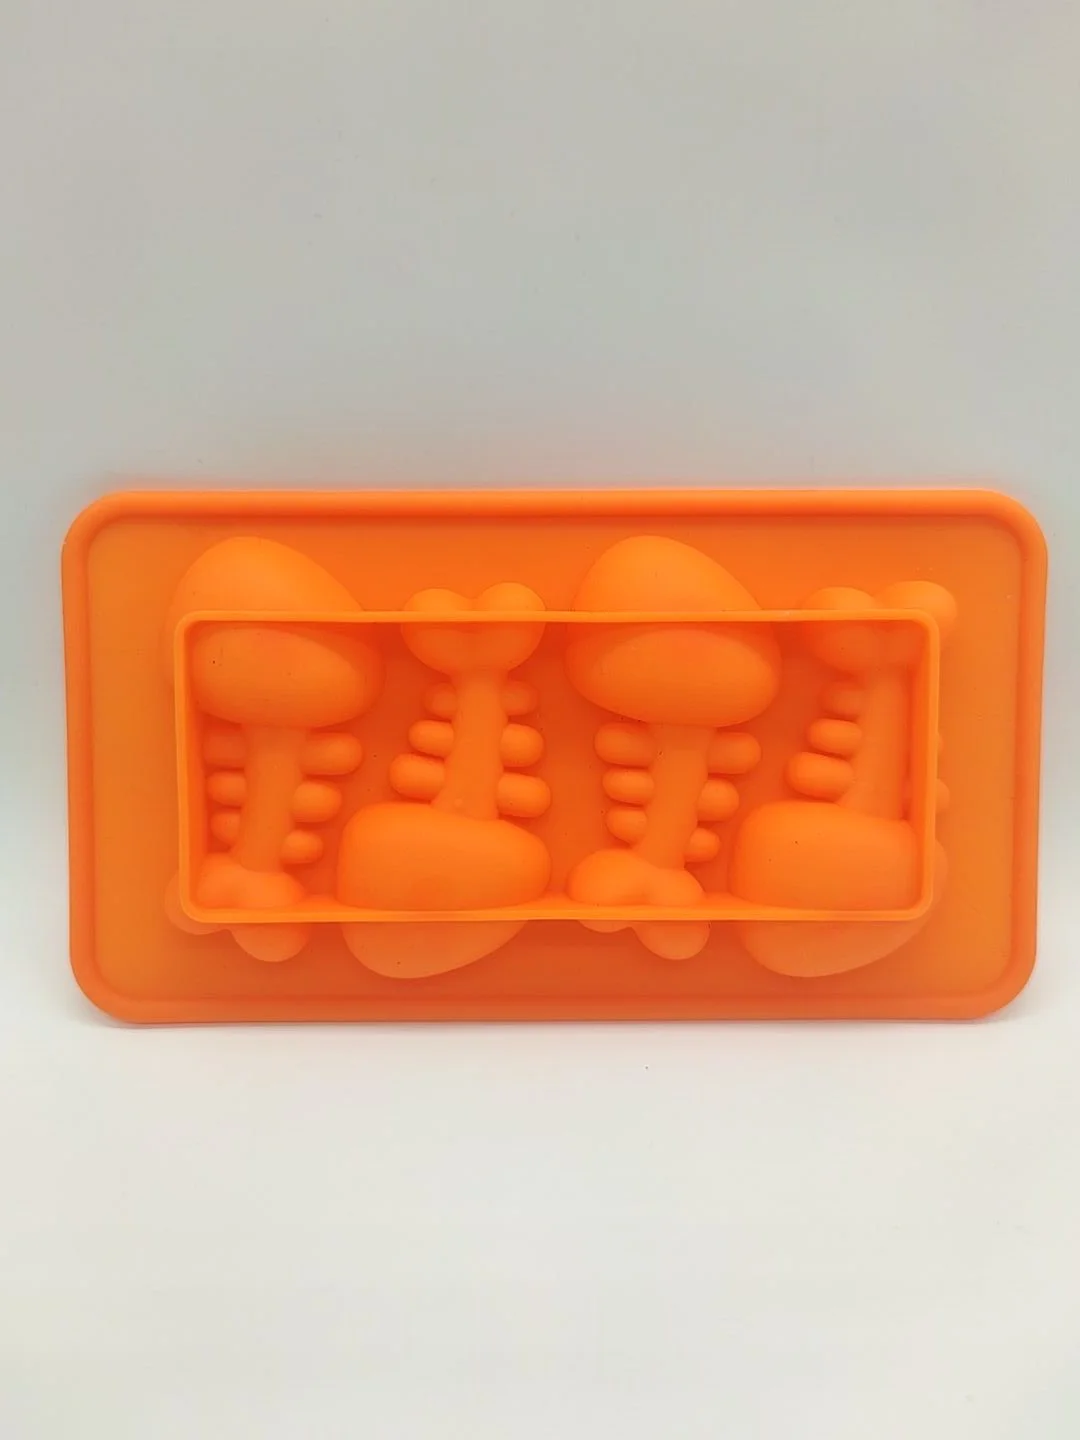 https://www.xhfsilicon.com/wp-content/uploads/2023/03/silicone-chocolate-mold-33-rotated.jpg.webp